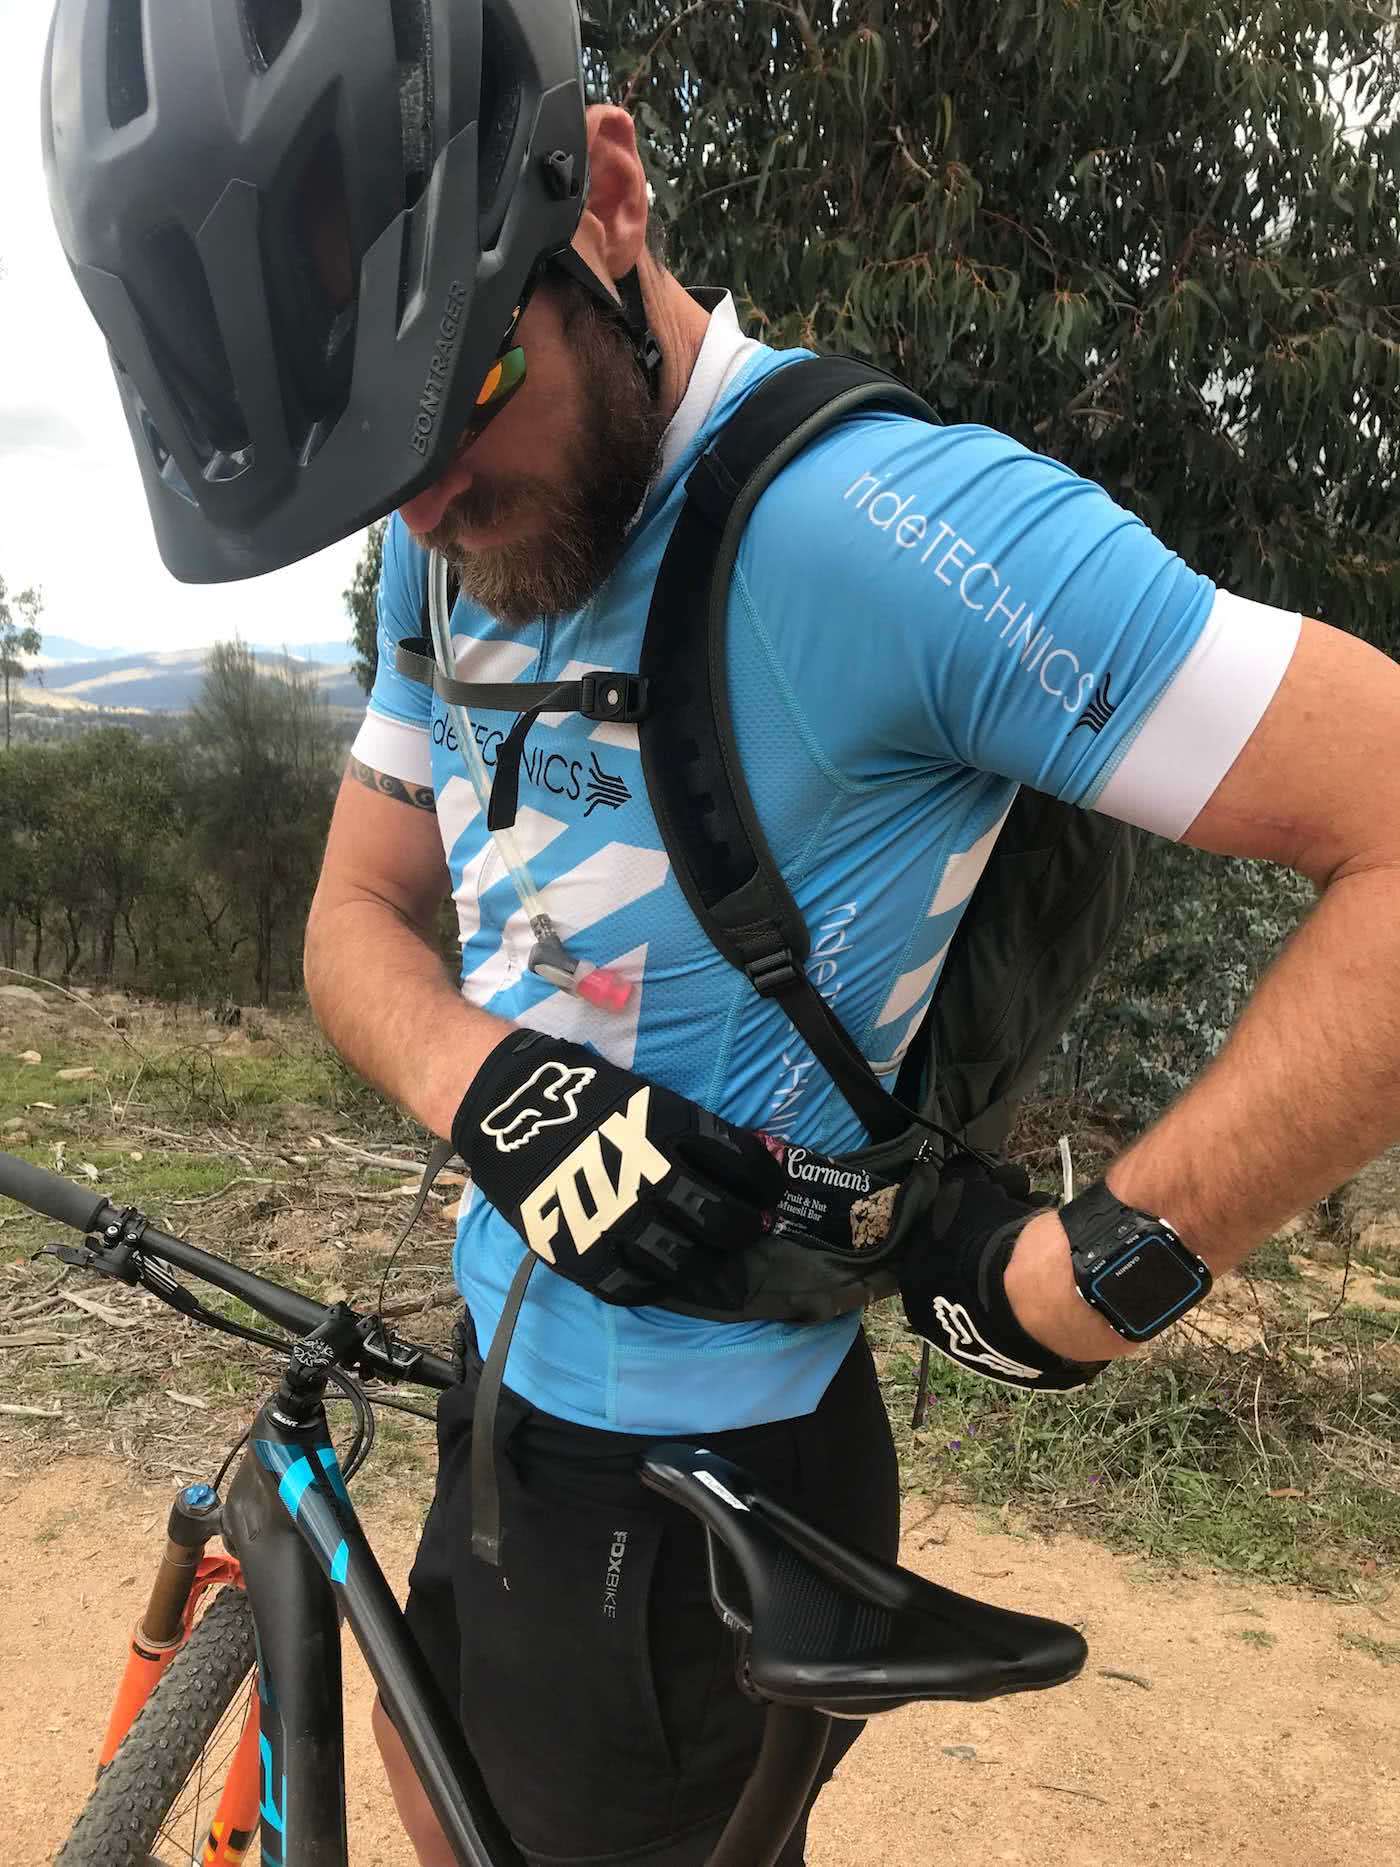 Osprey Raptor 10 Riding Pack // Gear Review by Rowan Beggs-French cycling backpack, rock garden, mountain biking, backpack detail, snack pocket